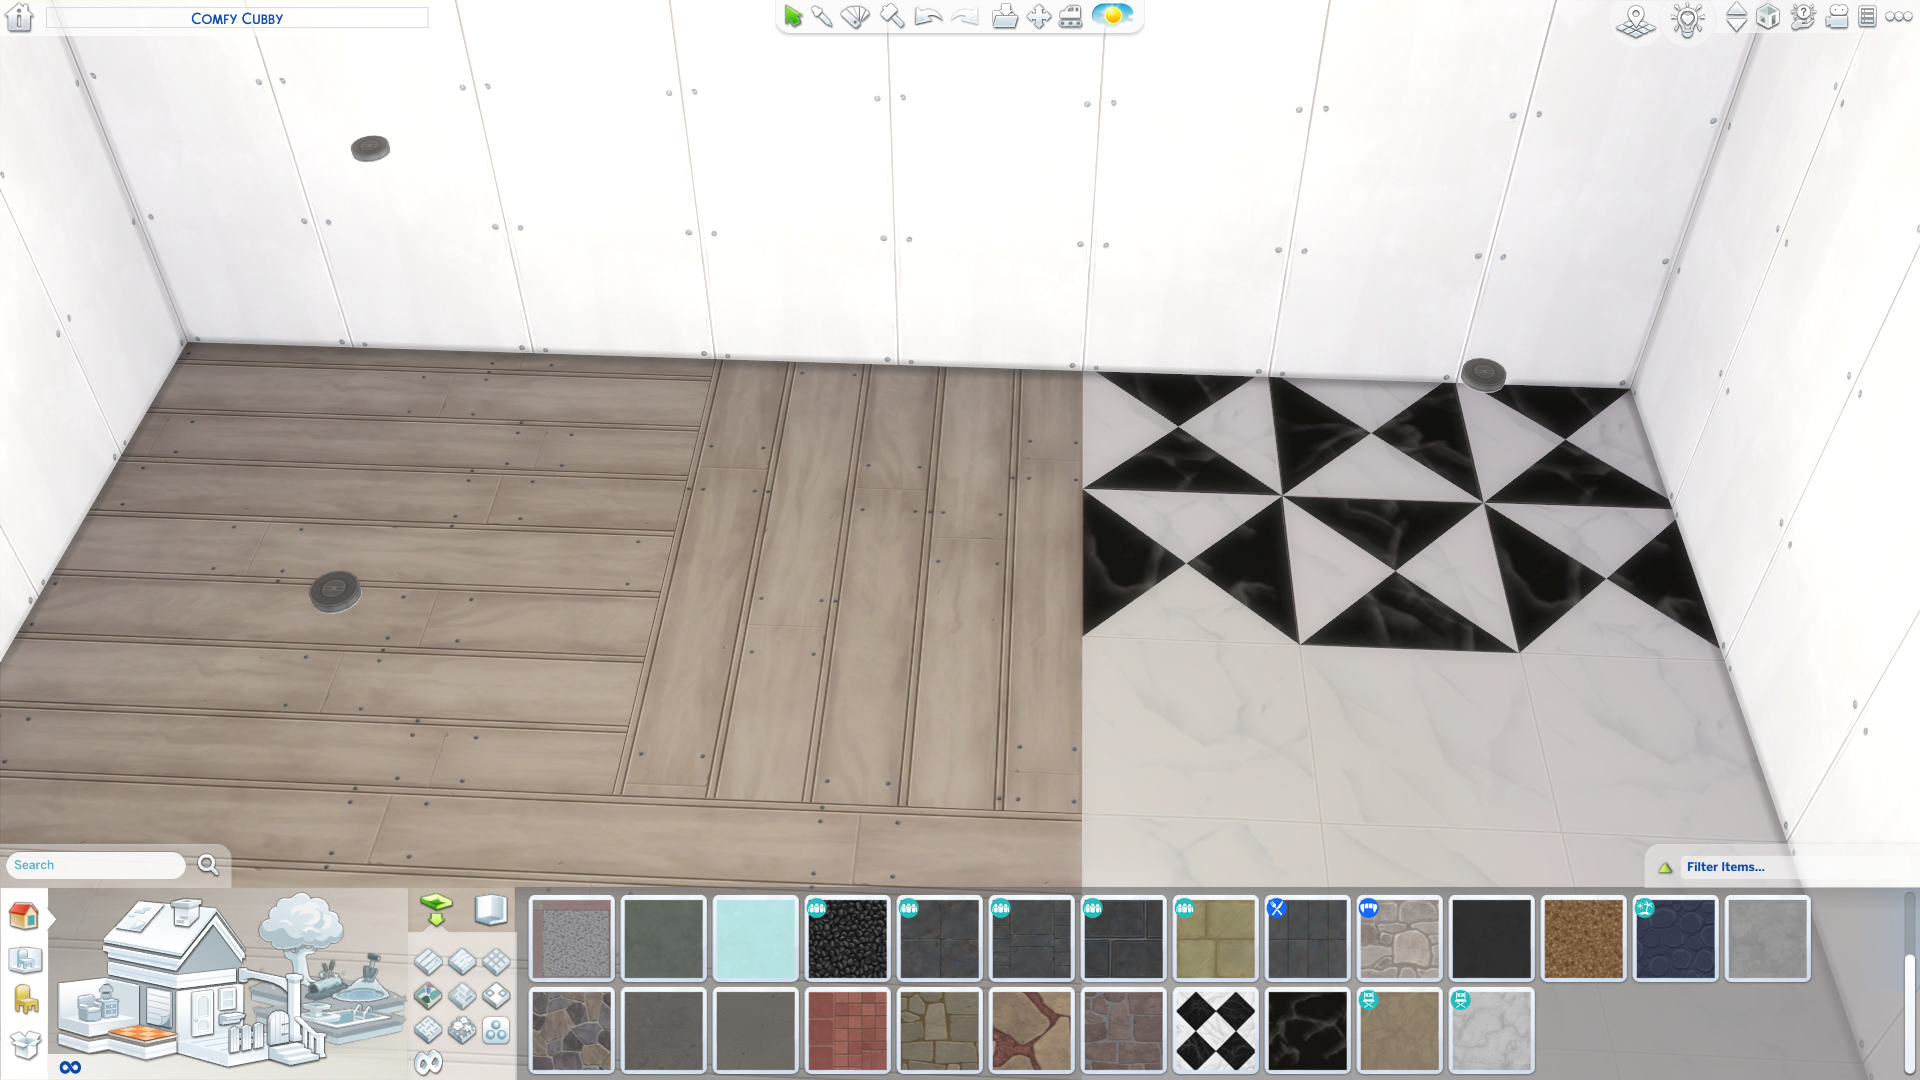 Different custom floor patterns in The Sims 4